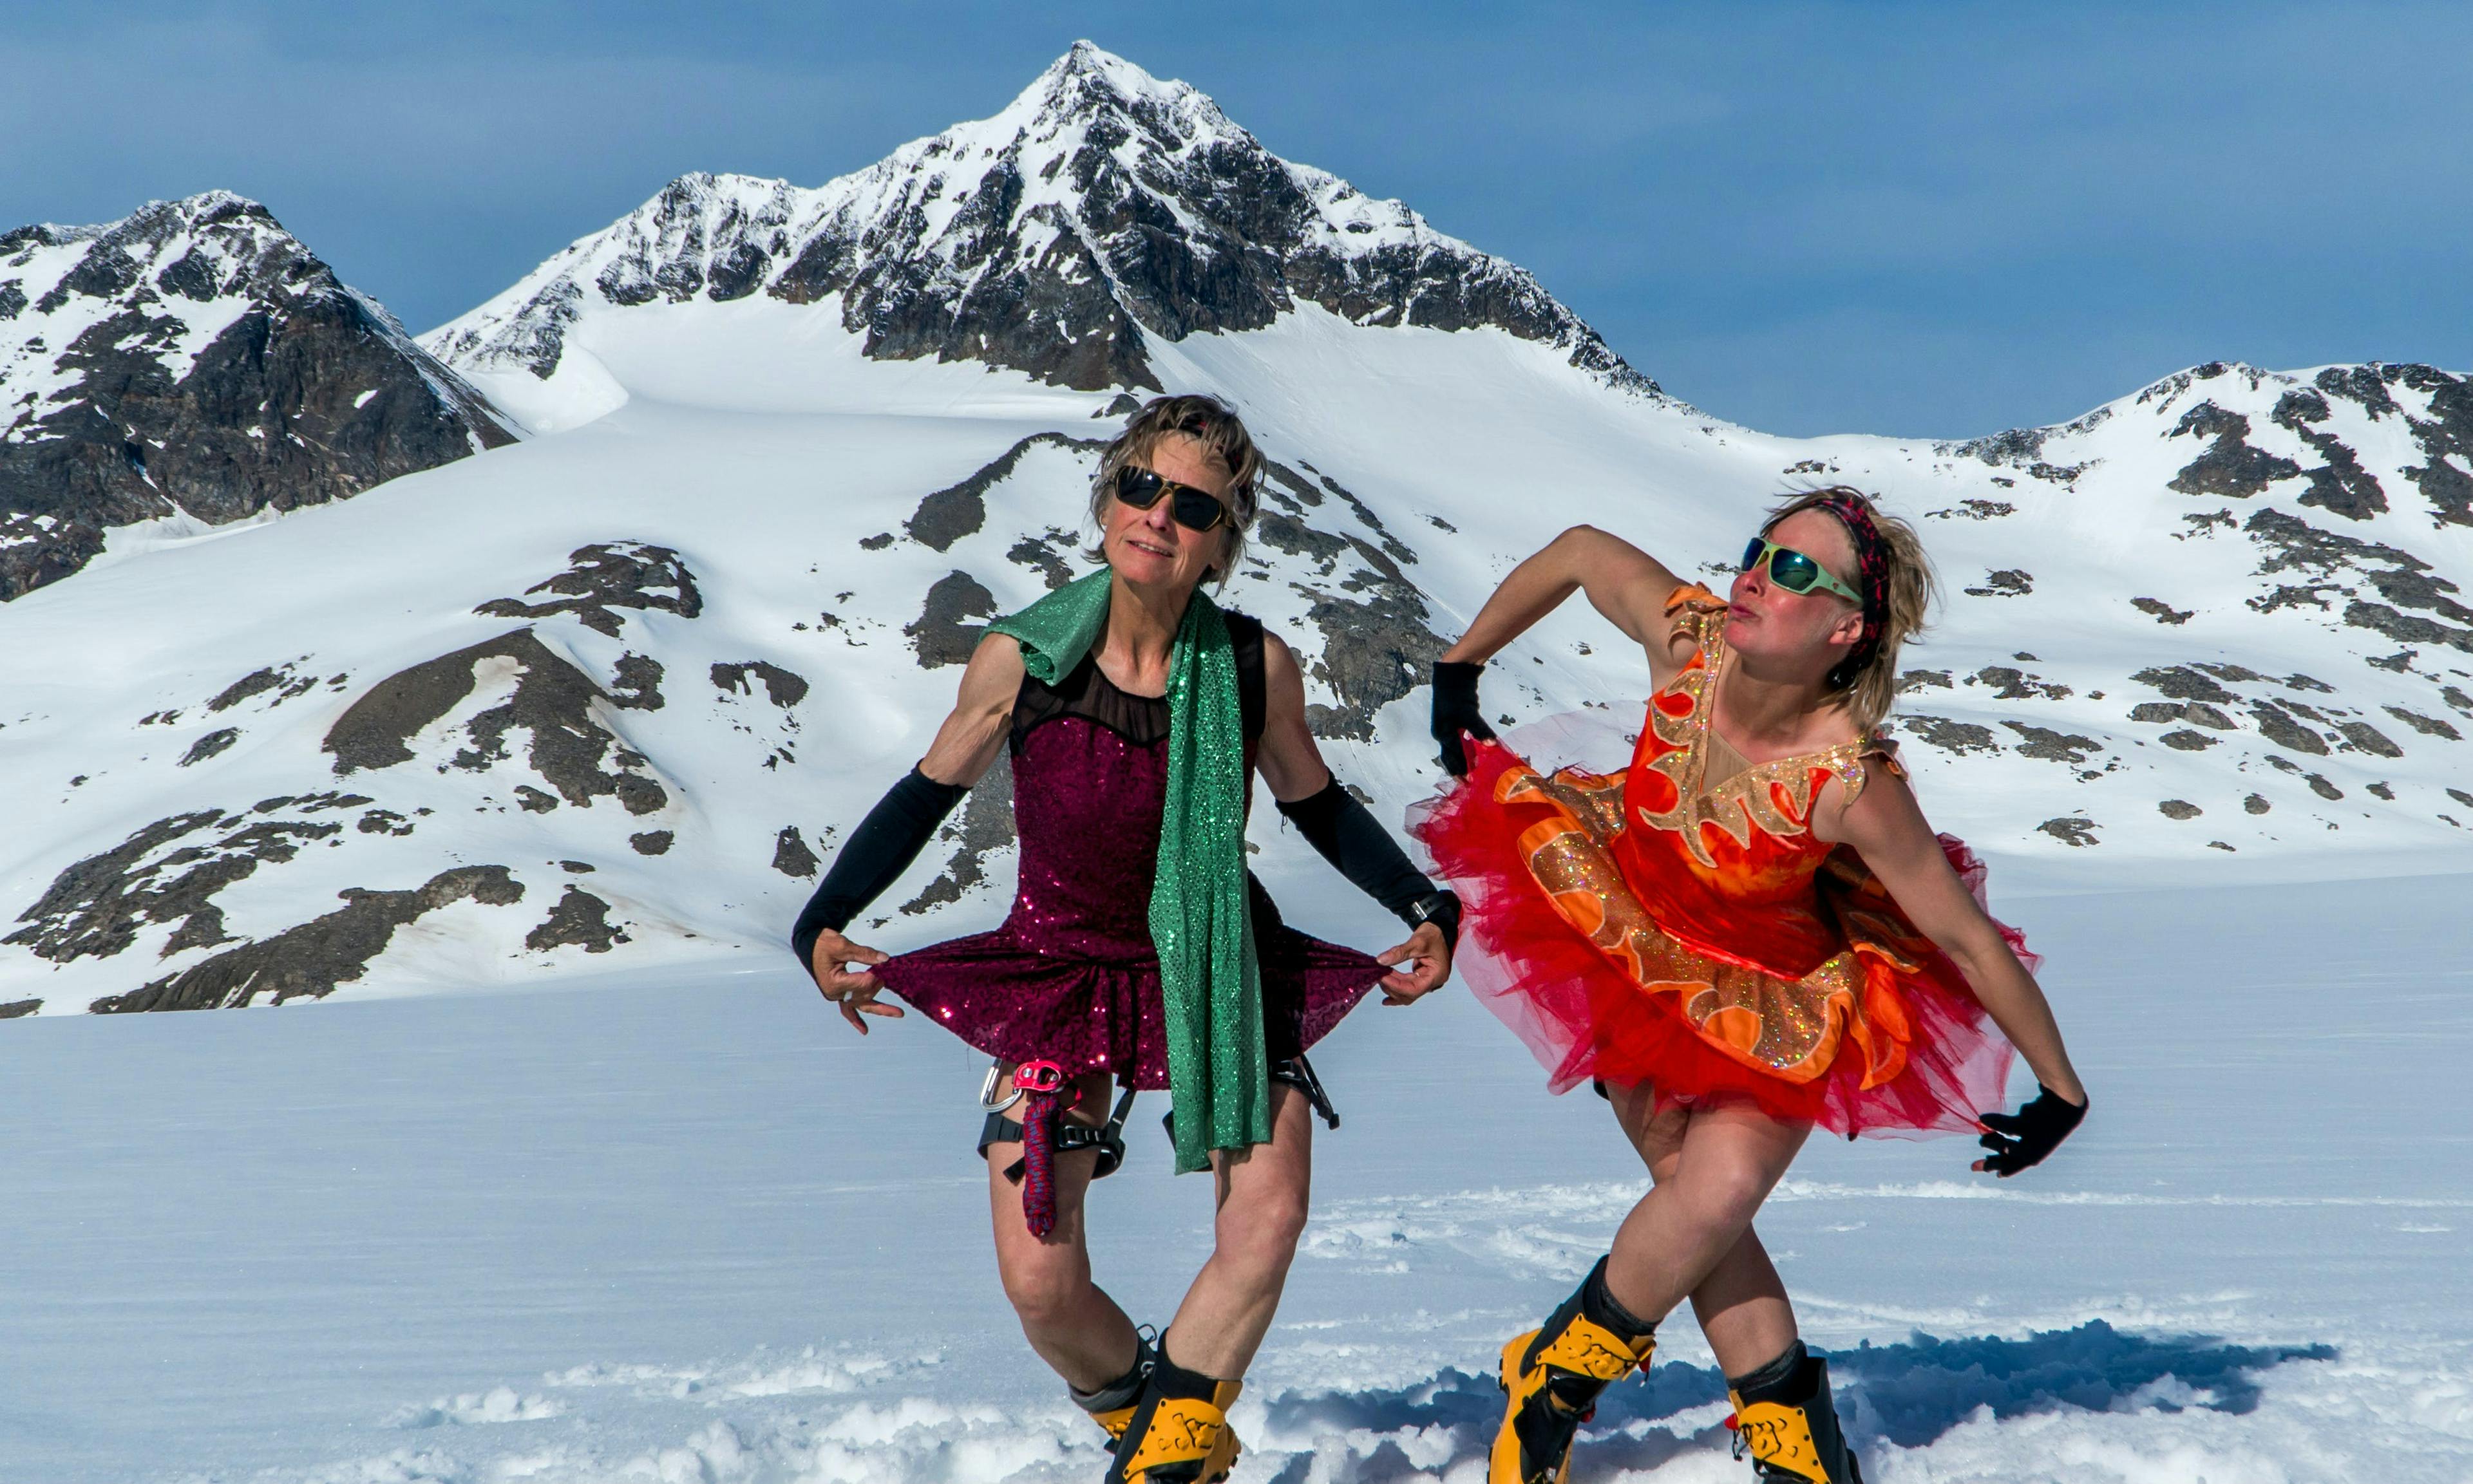 Two women curtsey while wearing shiny, flamboyant tutus in the middle of an alpine snowfield.